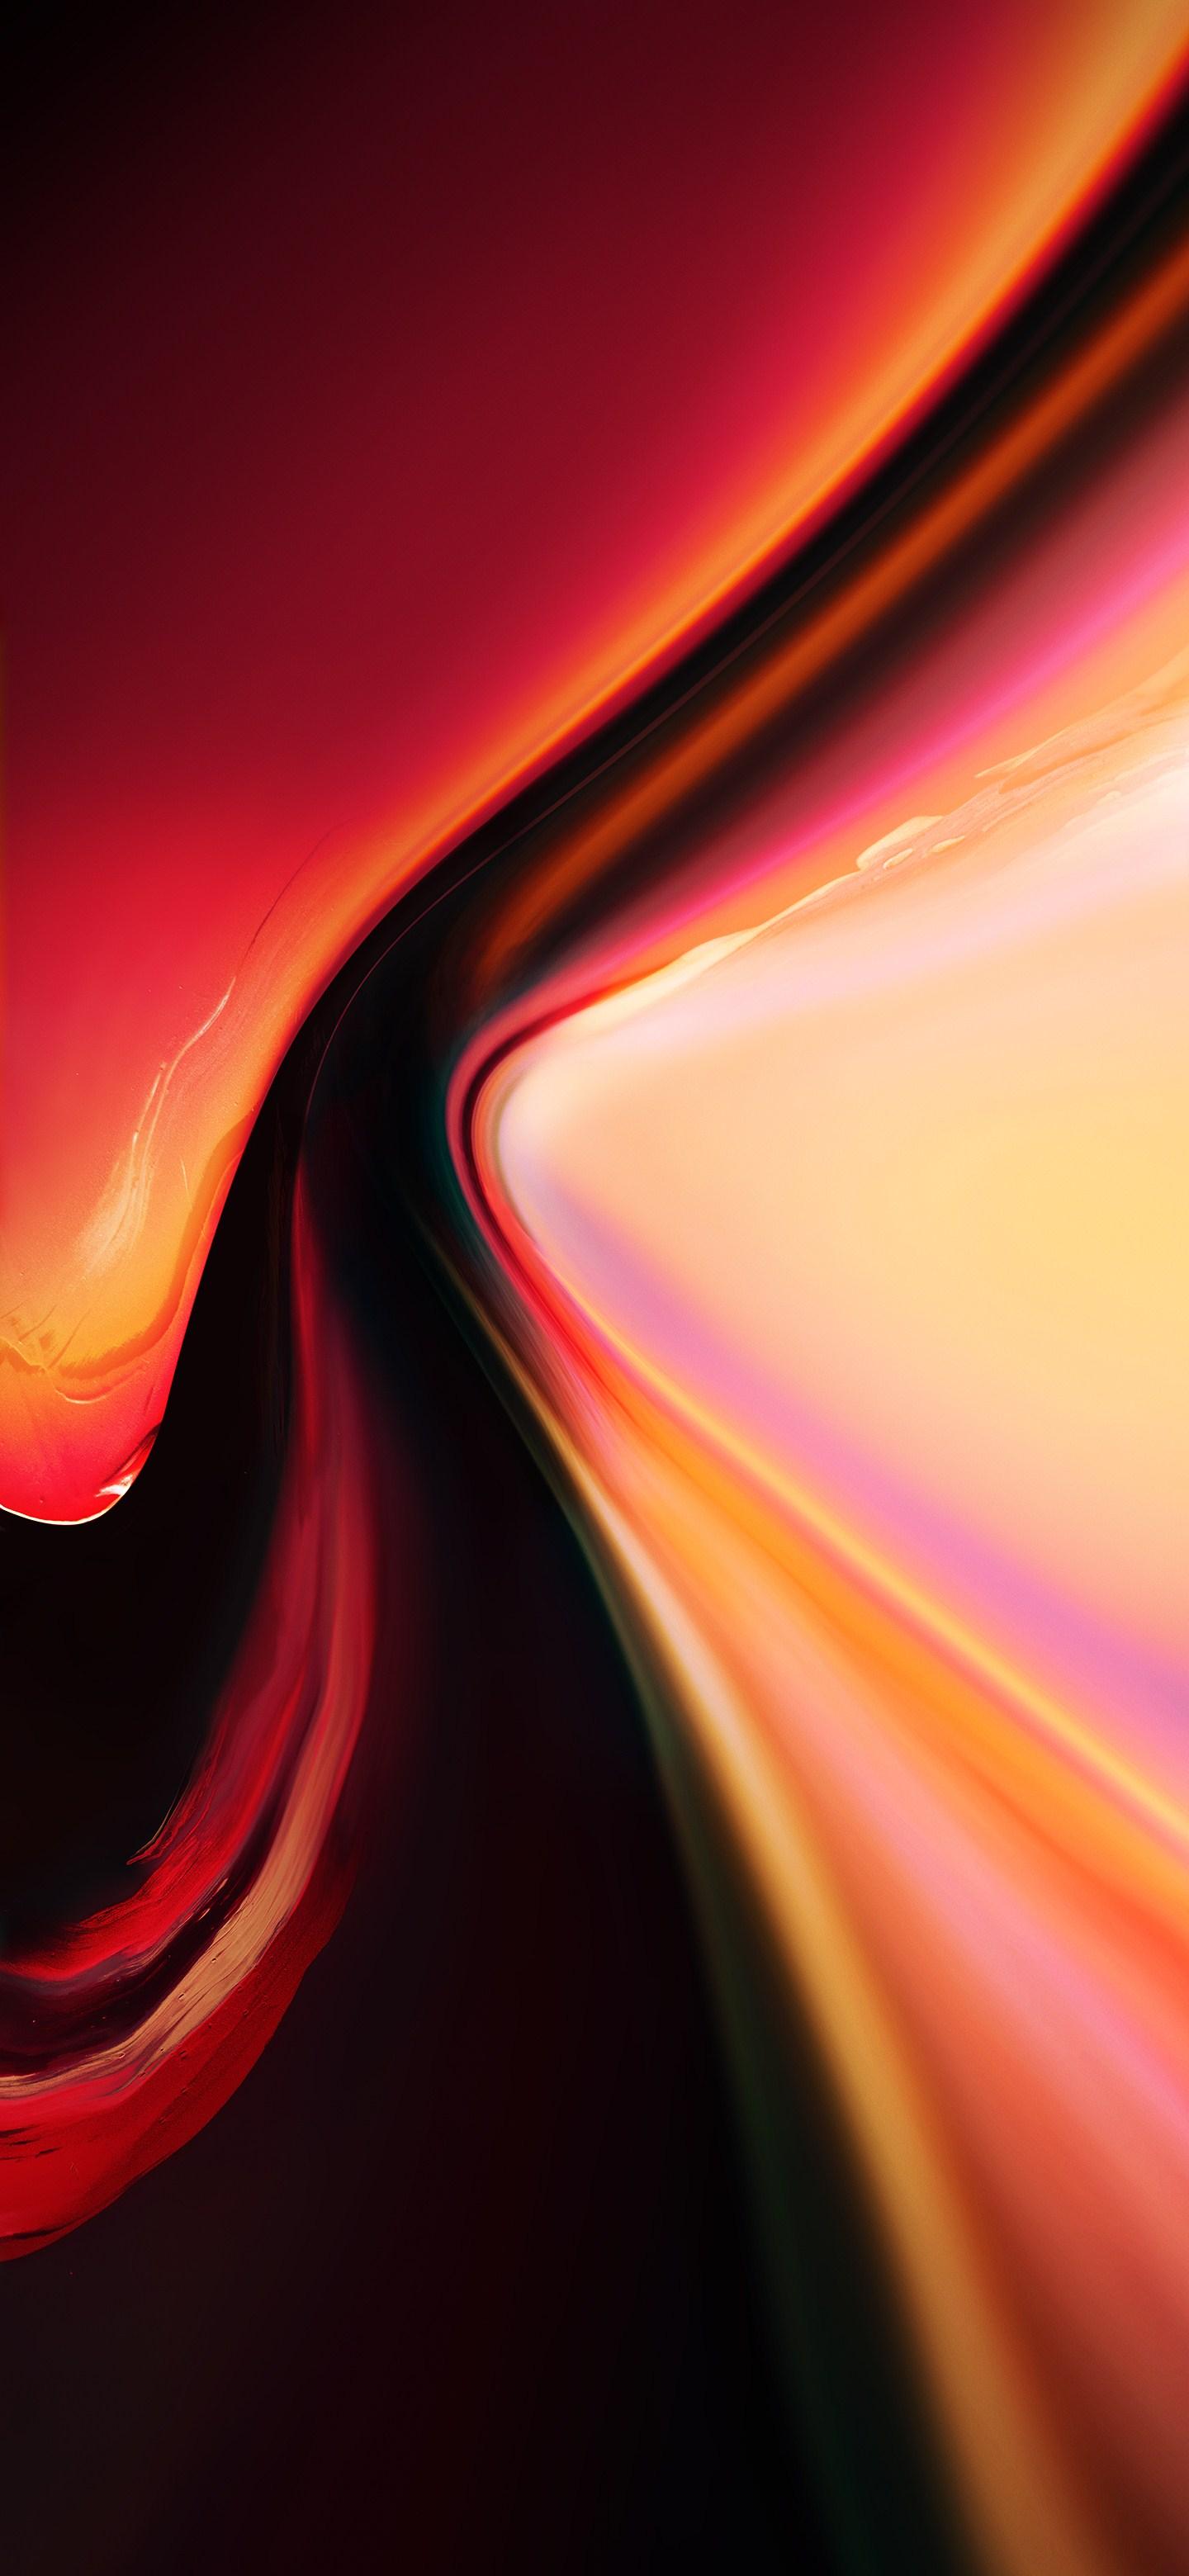 Absolutely Stunning OnePlus 7 Pro HD Wallpaper Free Download